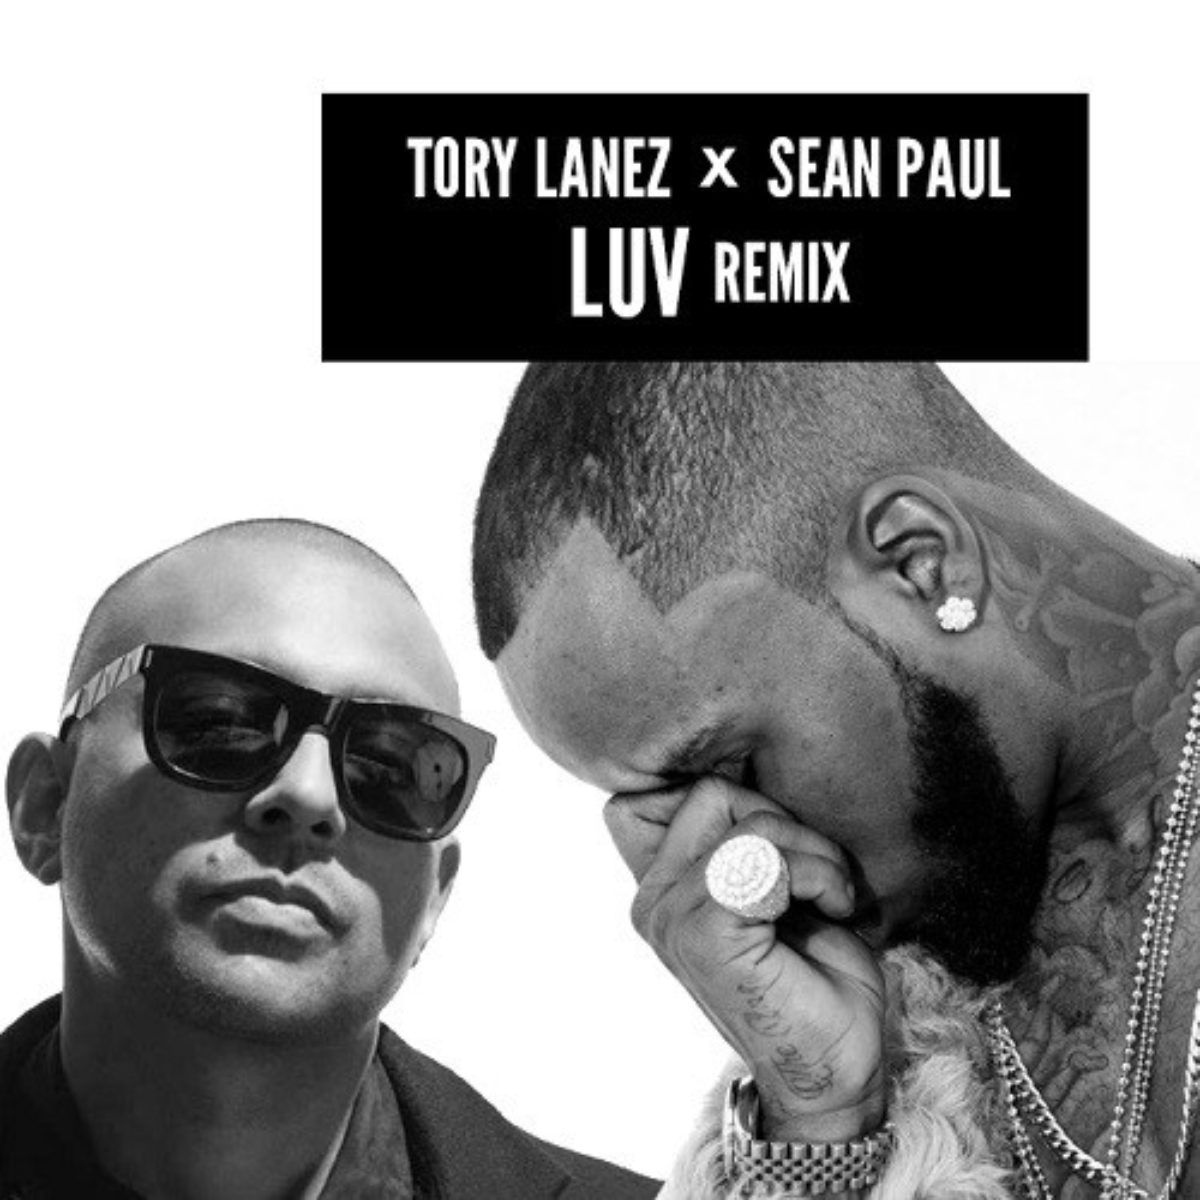 sean paul and tory lanez luv